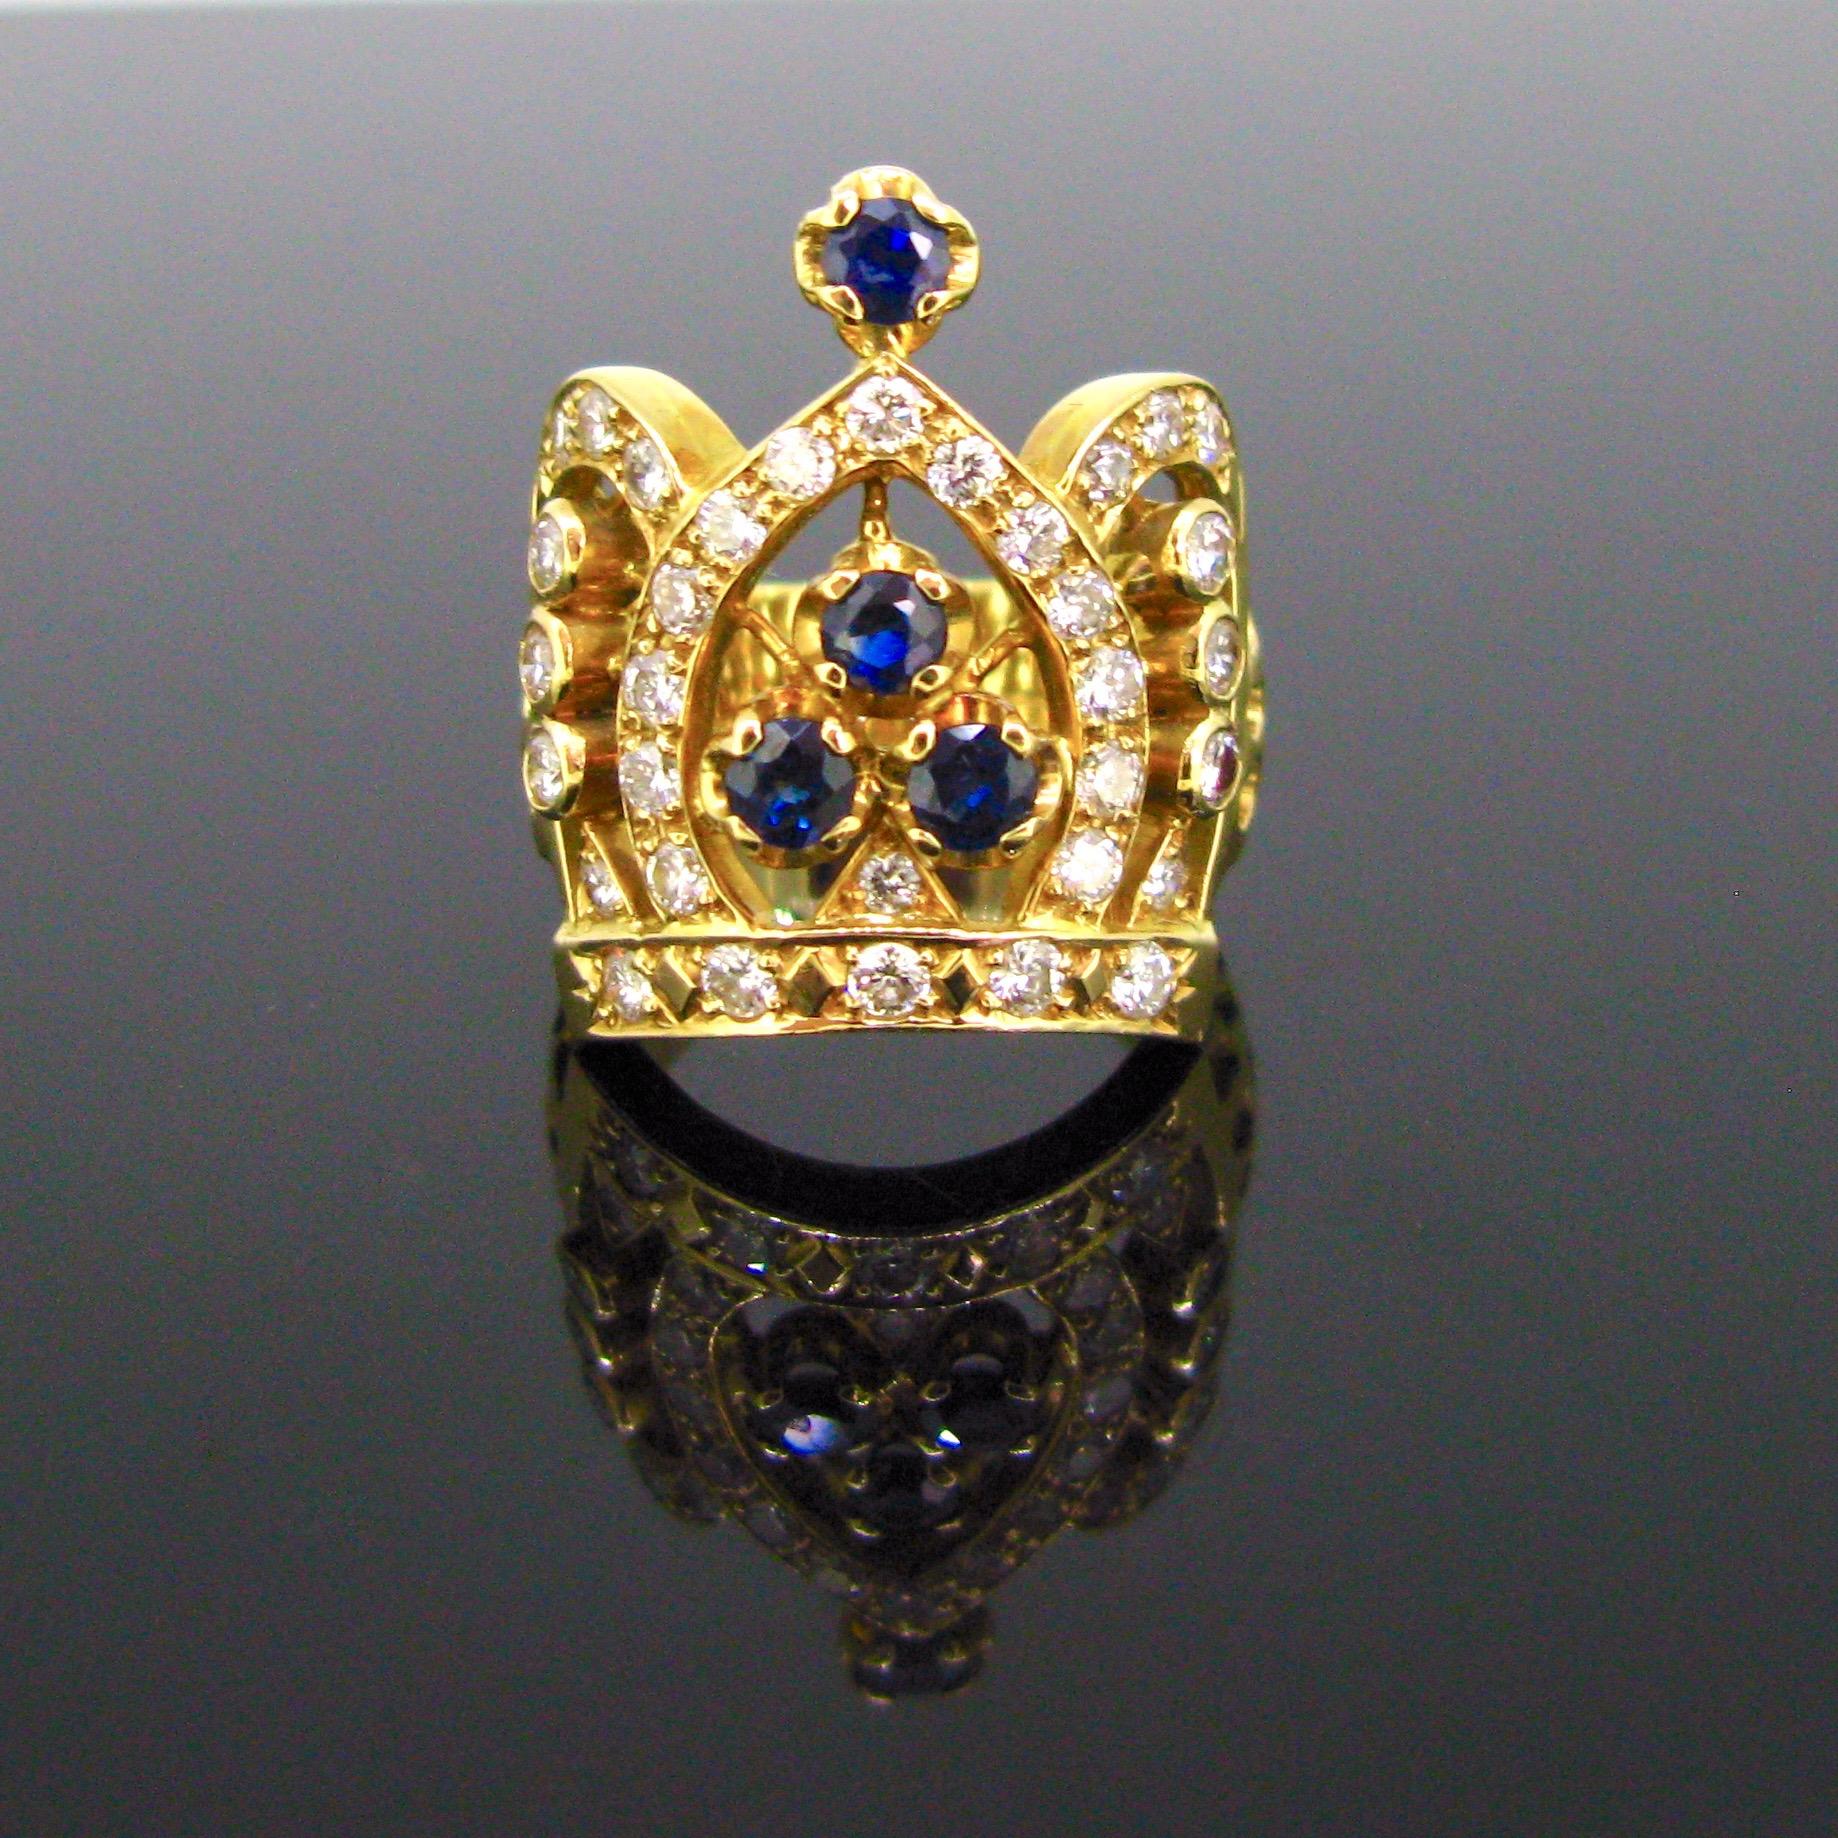 This ring is designed as a Crown.  It is set with 4 sapphires and adorned with brilliant cut diamonds. The ring is fully made in 18kt yellow gold.  It is controlled with the UK hallmarks.

Weight:	14gr

Circa:	Modern

Metal:	18kt yellow gold